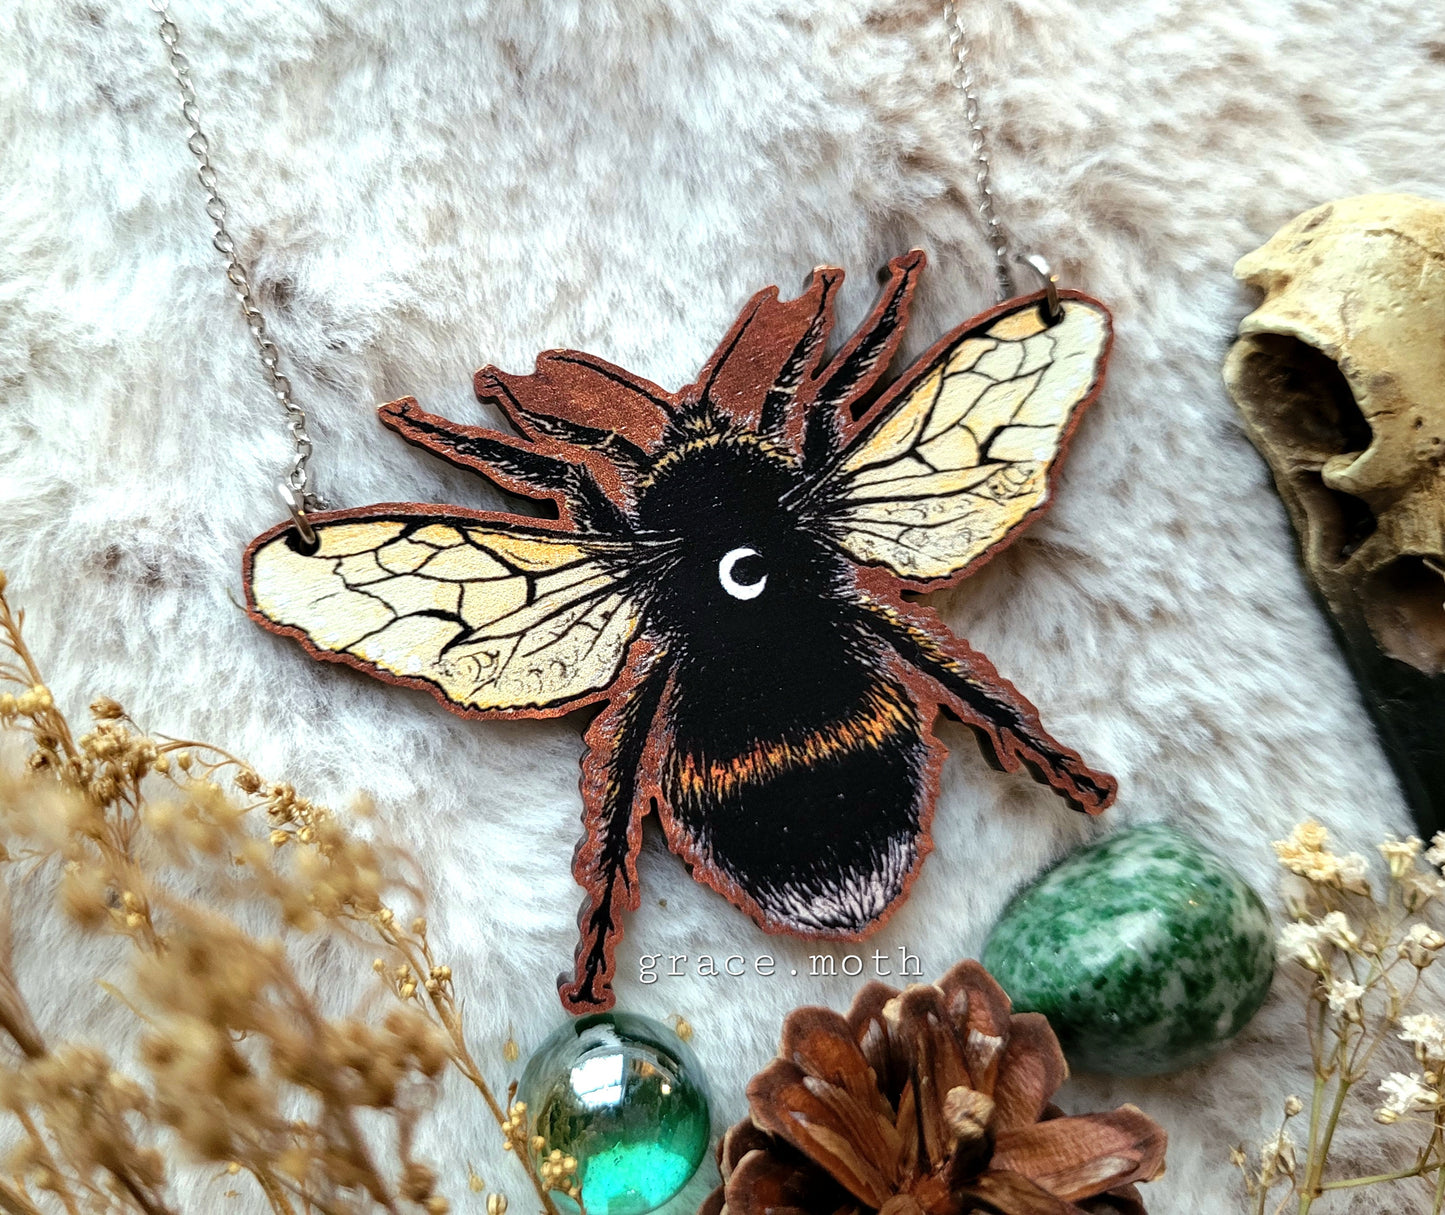 Large Bumble Bee illustrated necklace, responsibly sourced cherry wood, chain options available, by Grace Moth